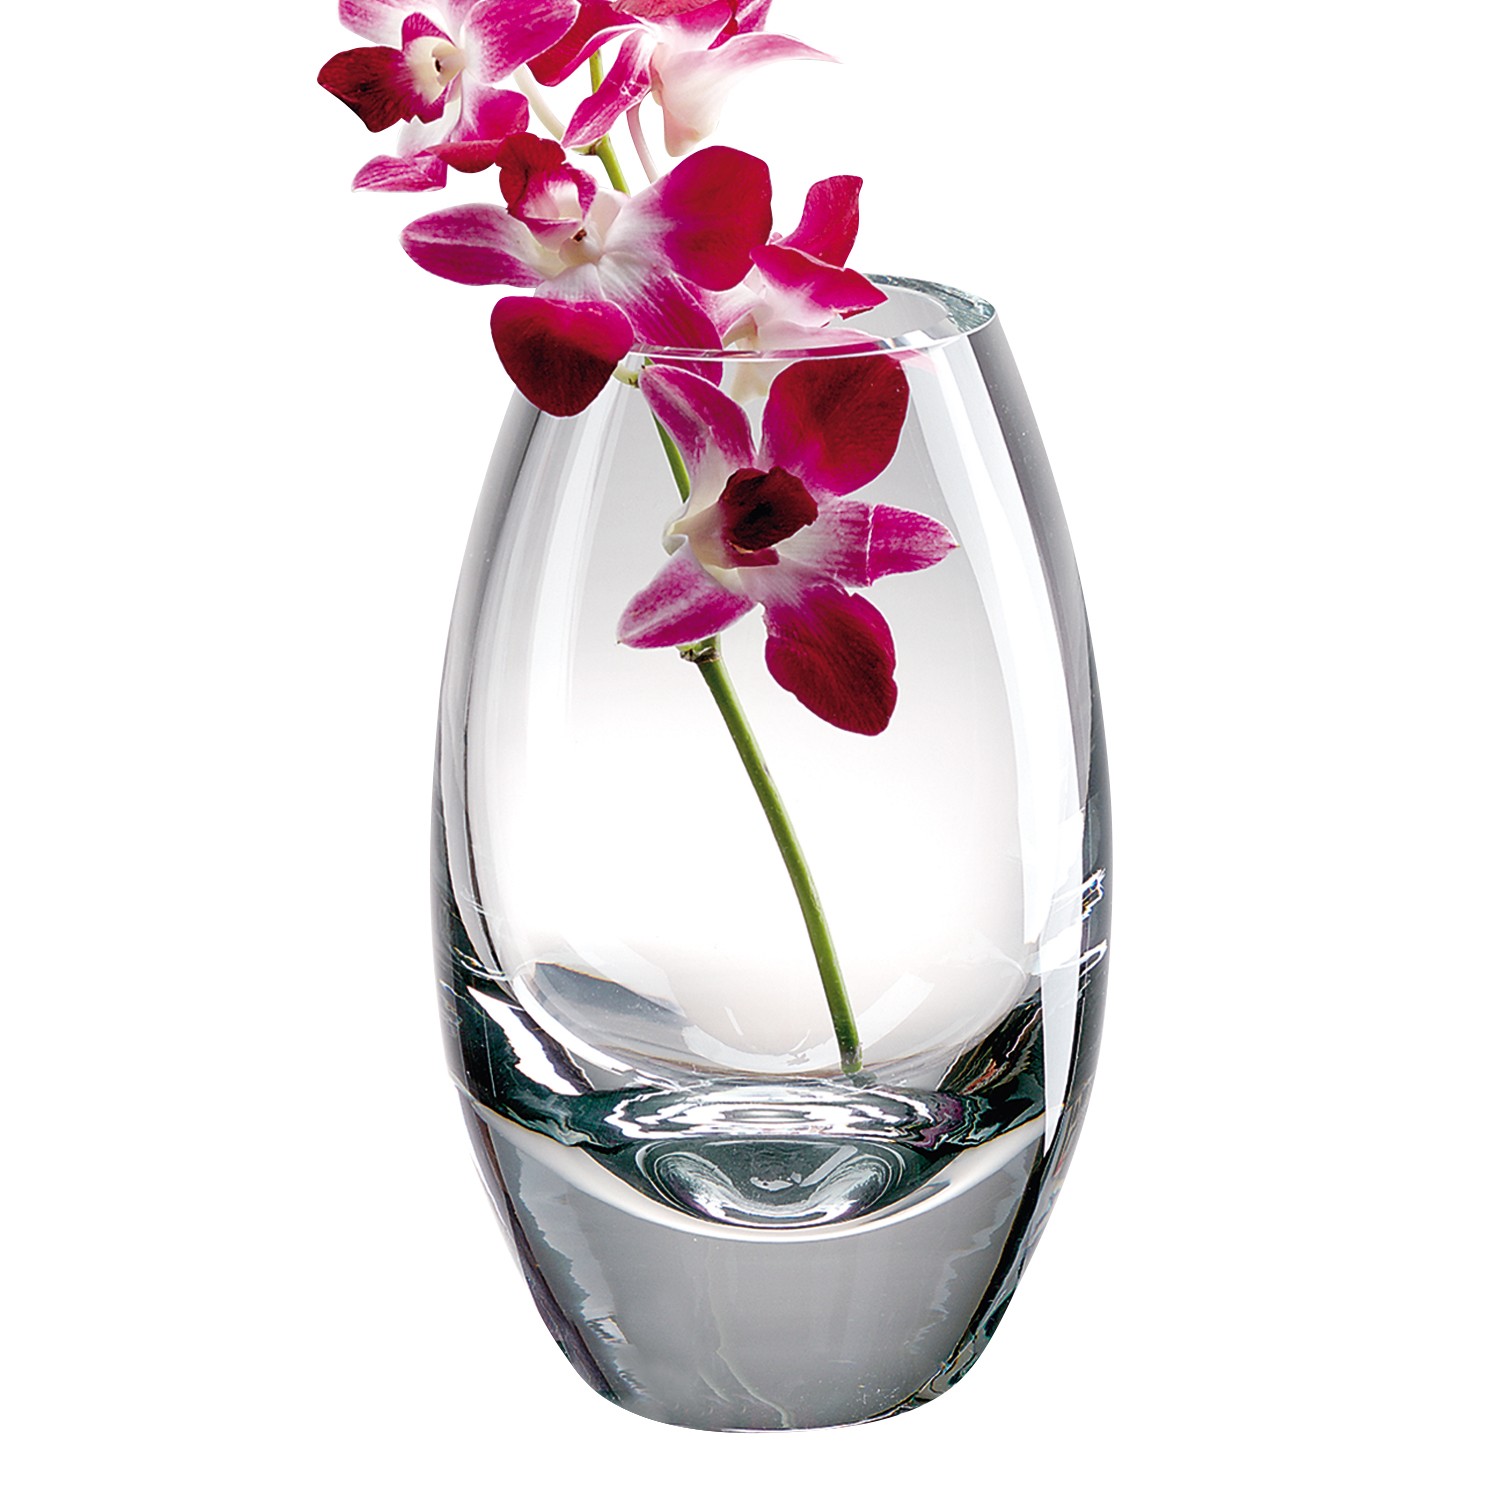 10.5" Mouth Blown Crystal European Made Crystal Vase